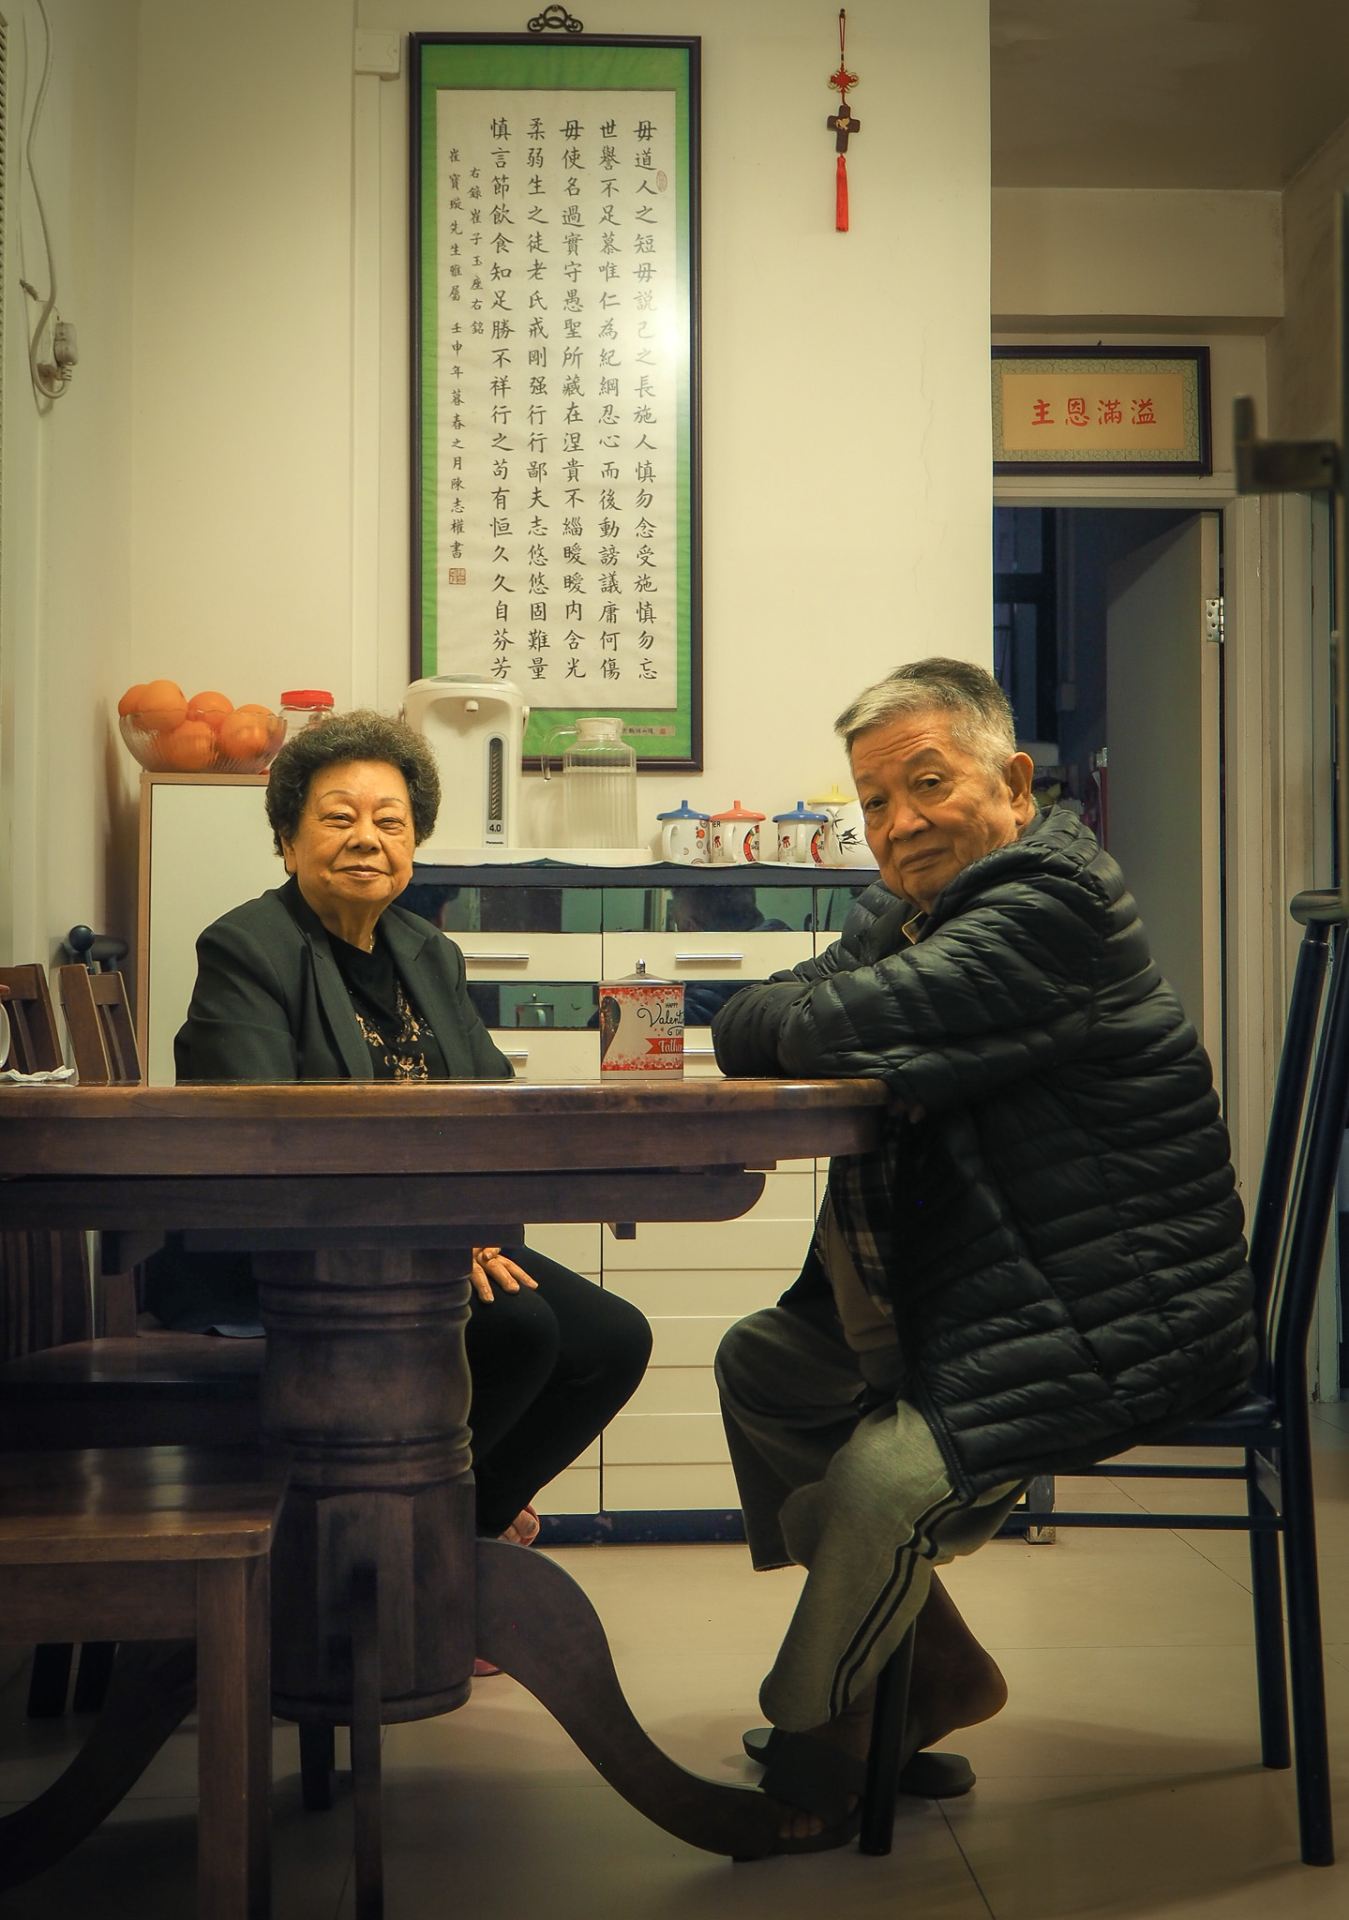 An image of my grandparents facing the camera sitting around a circluar wooden table in their living room in Hong Kong.